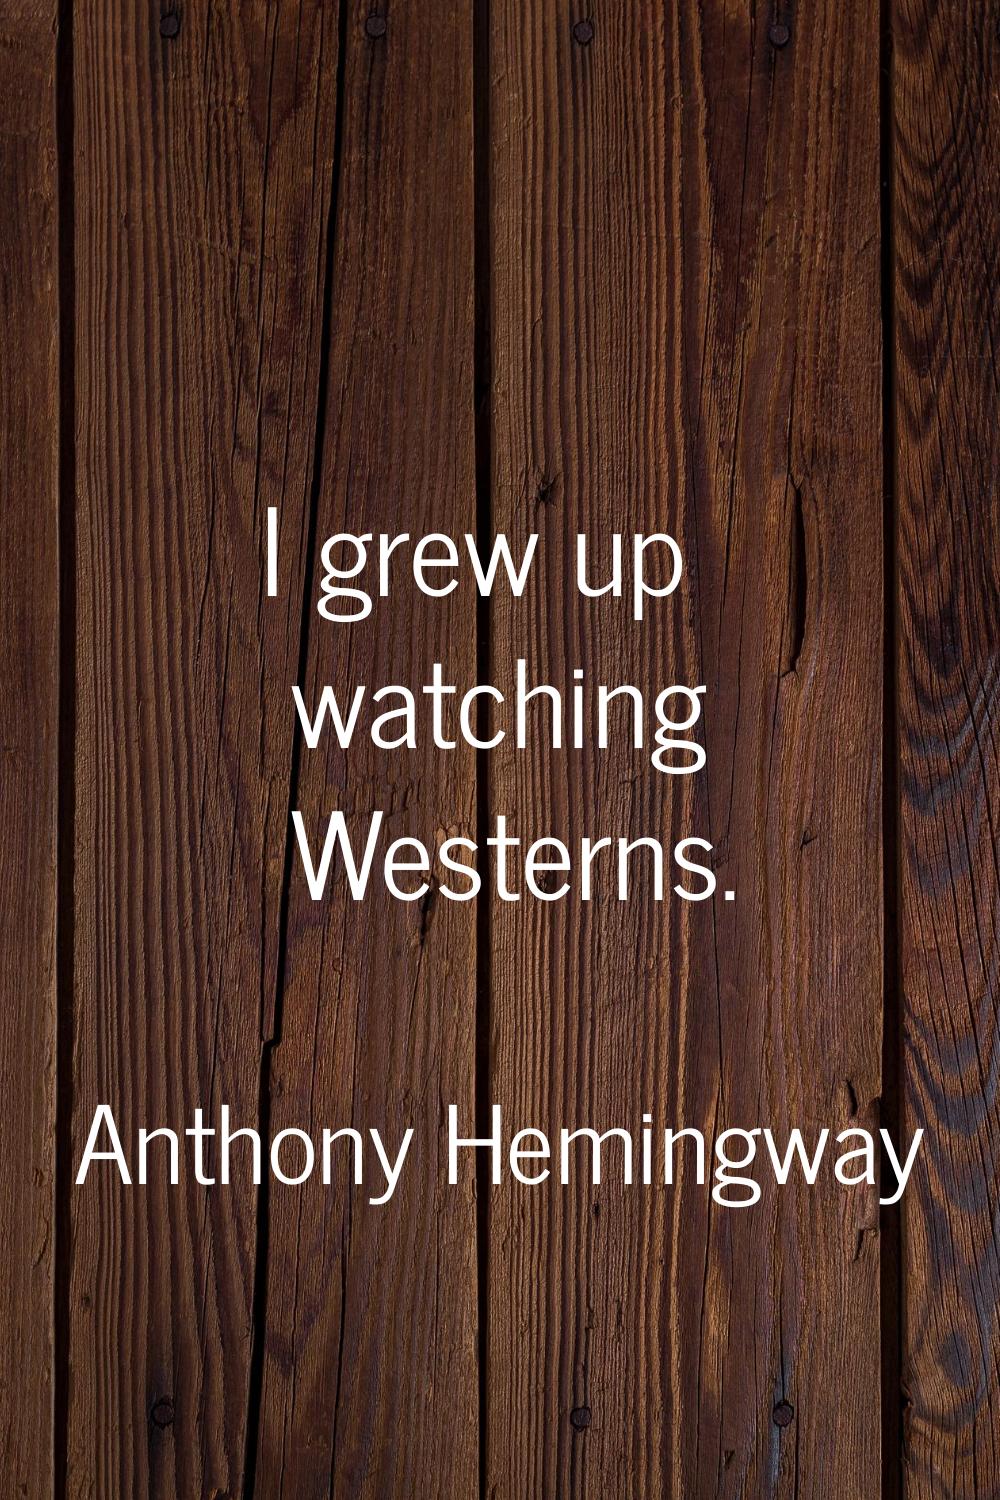 I grew up watching Westerns.